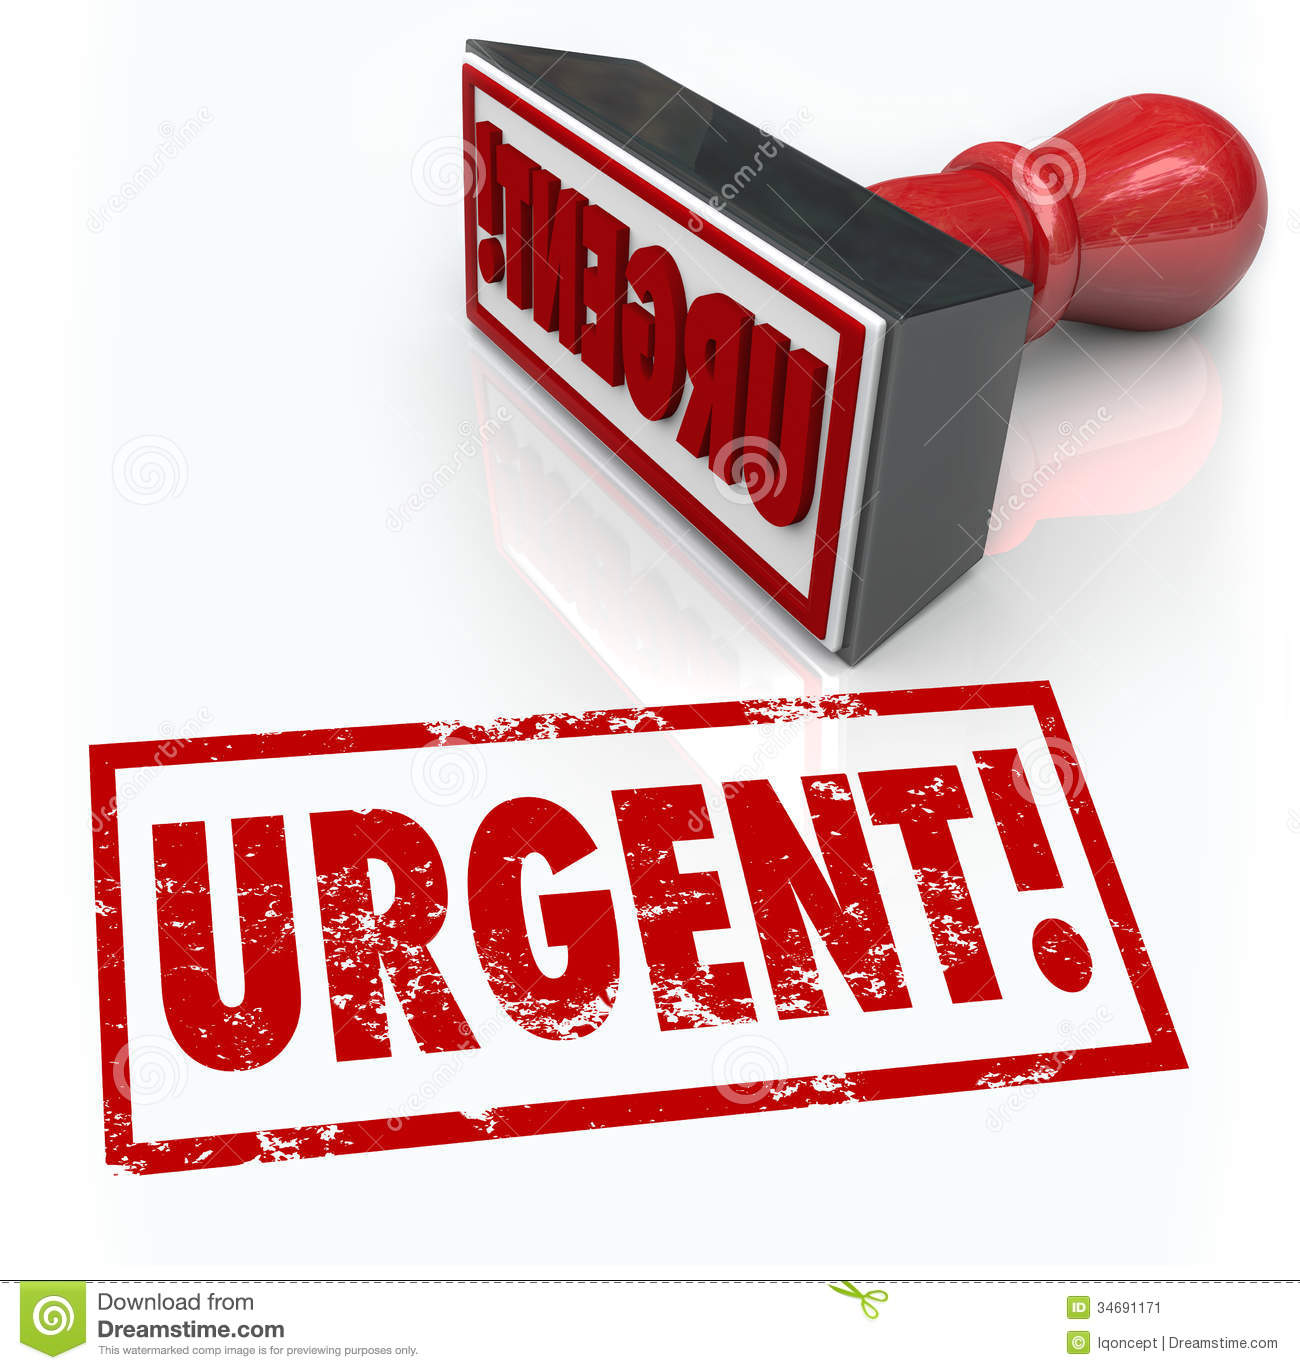 The Word Urgent On A Red Rubber Stamp To Illustrate An Emergency Or